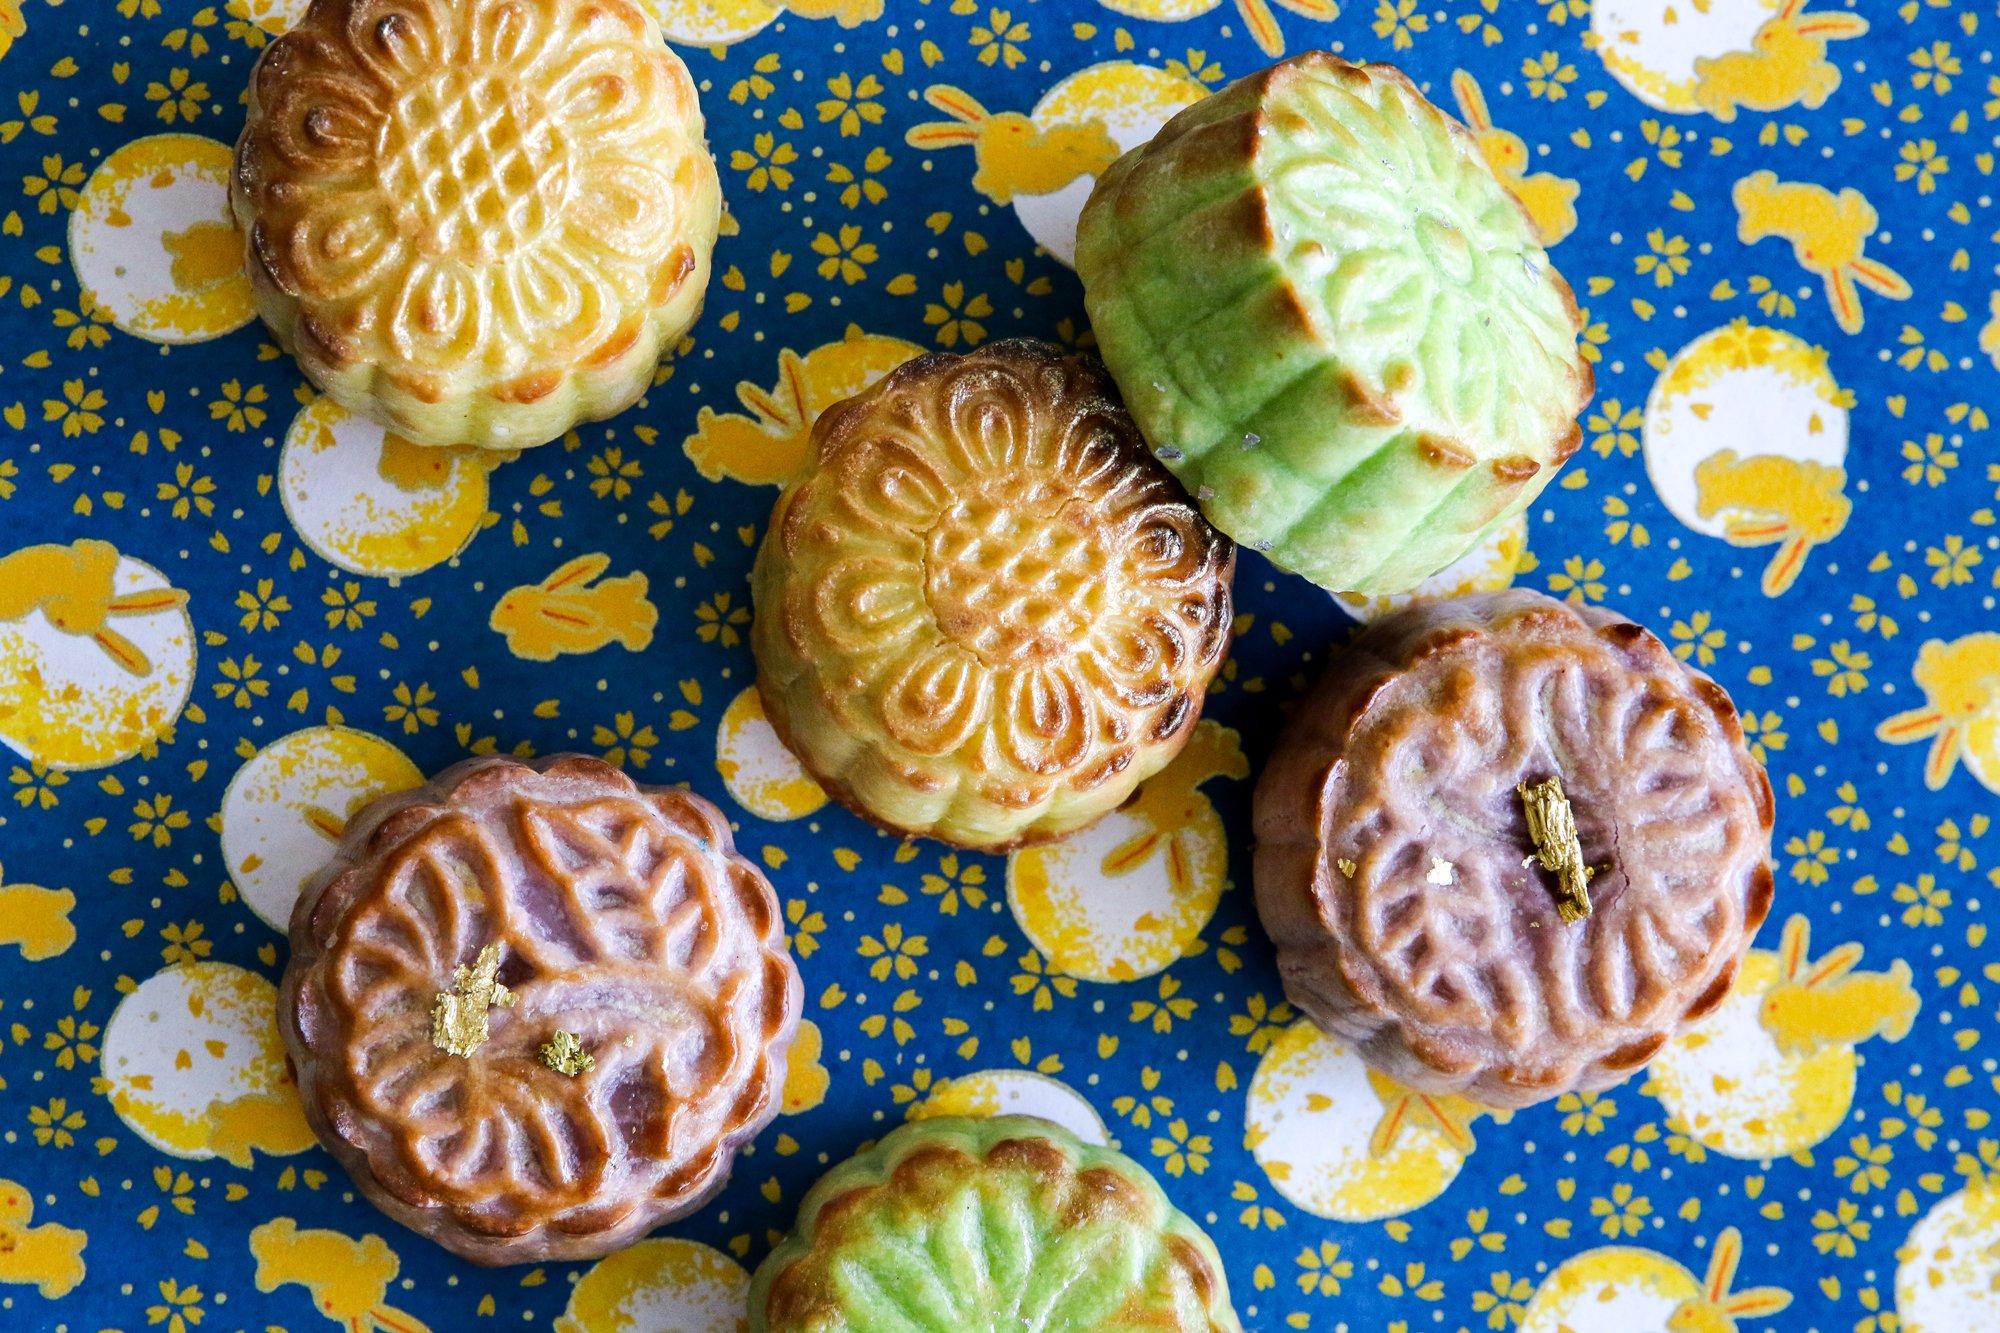 Celebrate the warmth of tradition during Mid-Autumn Festival